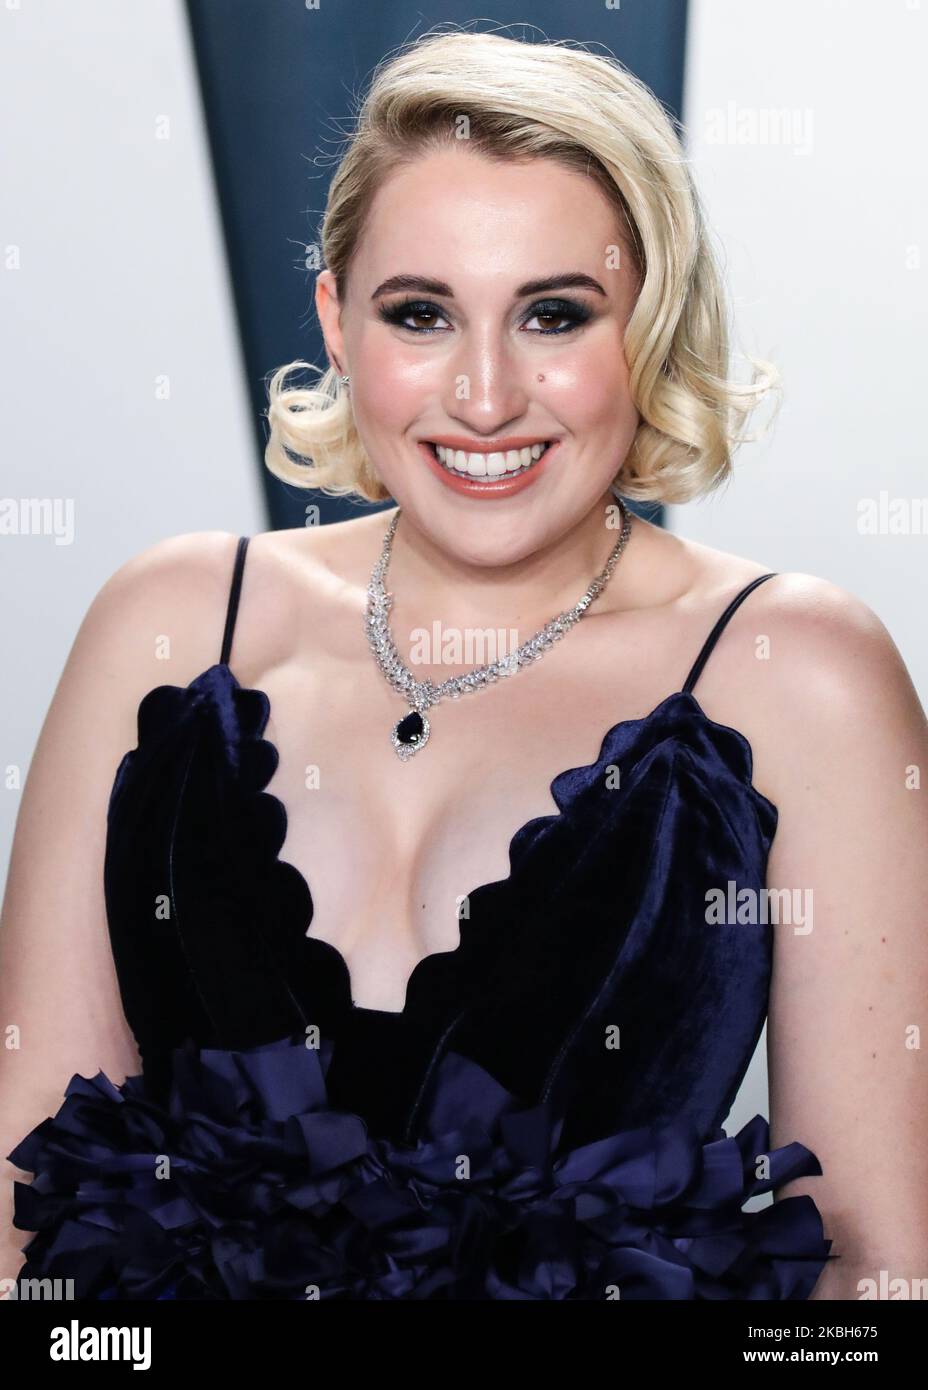 BEVERLY HILLS, LOS ANGELES, CALIFORNIA, USA - FEBRUARY 09: Actress Harley Quinn Smith arrives at the 2020 Vanity Fair Oscar Party held at the Wallis Annenberg Center for the Performing Arts on February 9, 2020 in Beverly Hills, Los Angeles, California, United States. (Photo by Xavier Collin/Image Press Agency/NurPhoto) Stock Photo